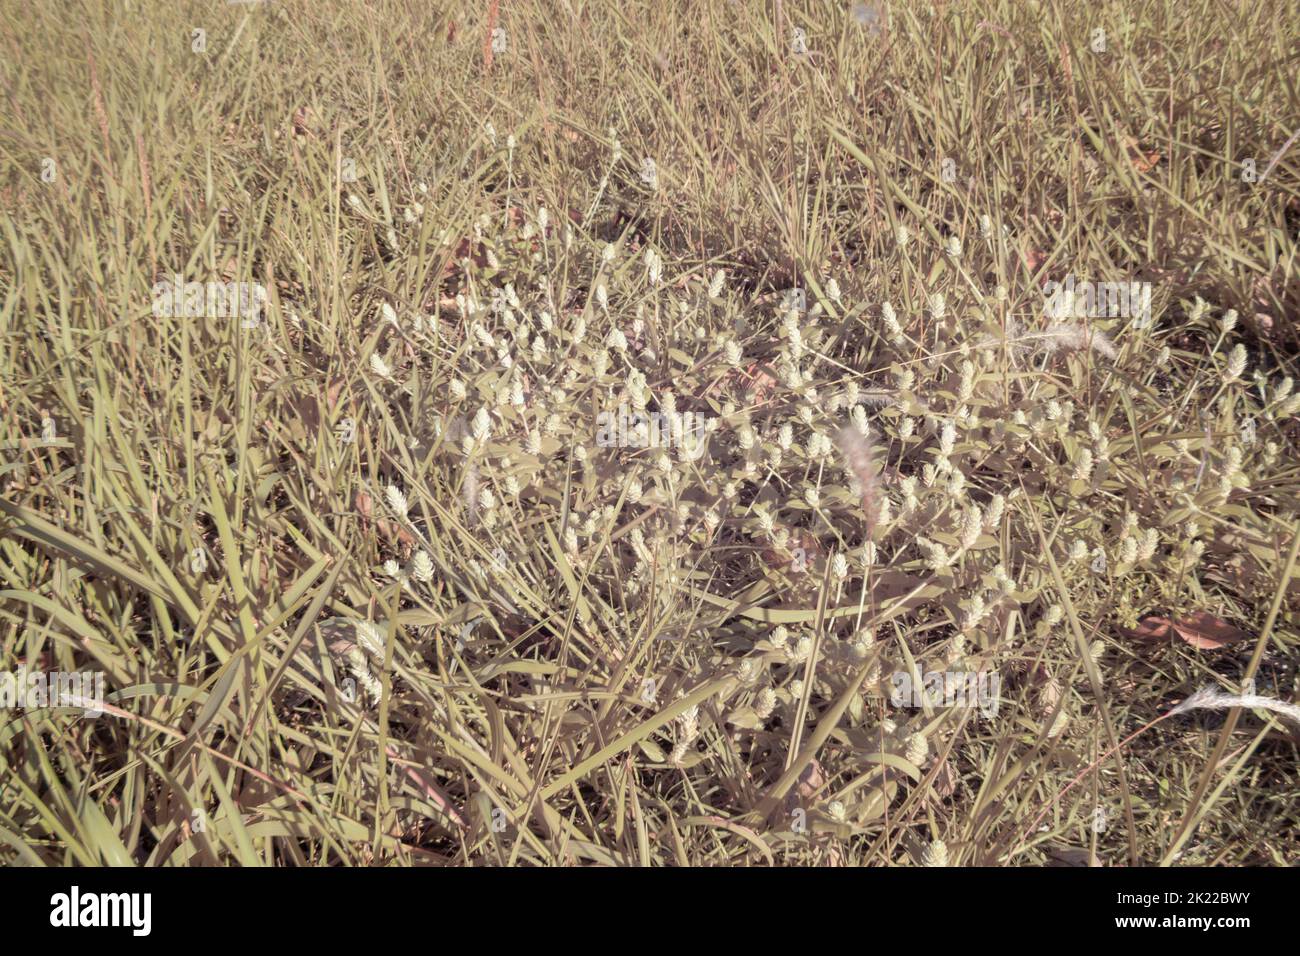 infrared image of the wild gomphrena celosioides weed growing among the grass. Stock Photo